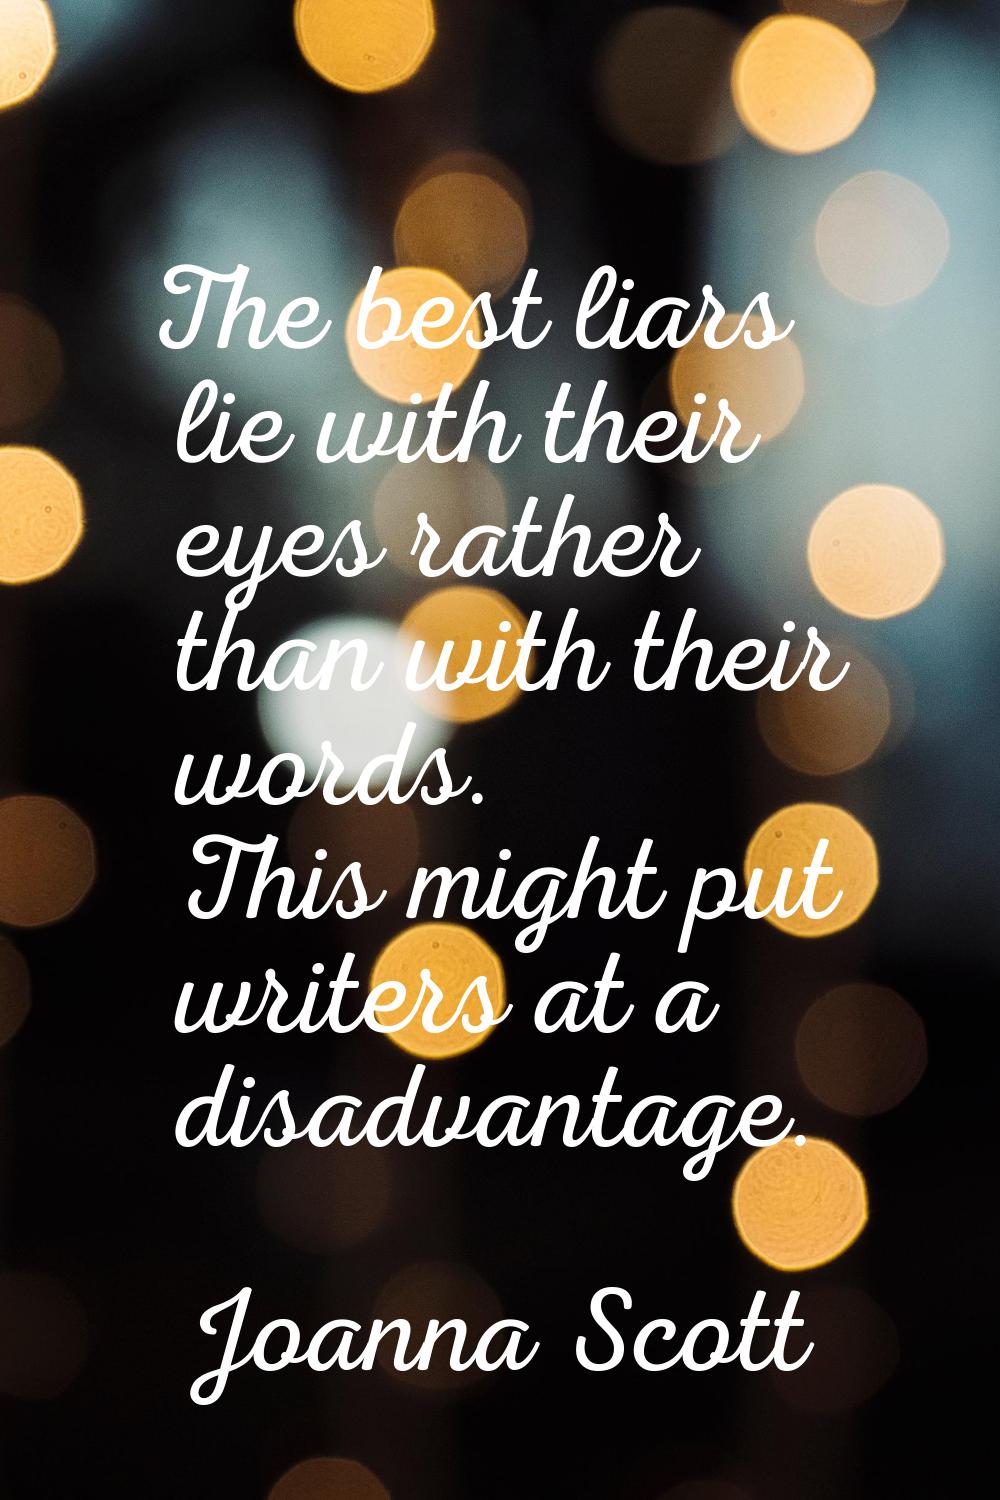 The best liars lie with their eyes rather than with their words. This might put writers at a disadv